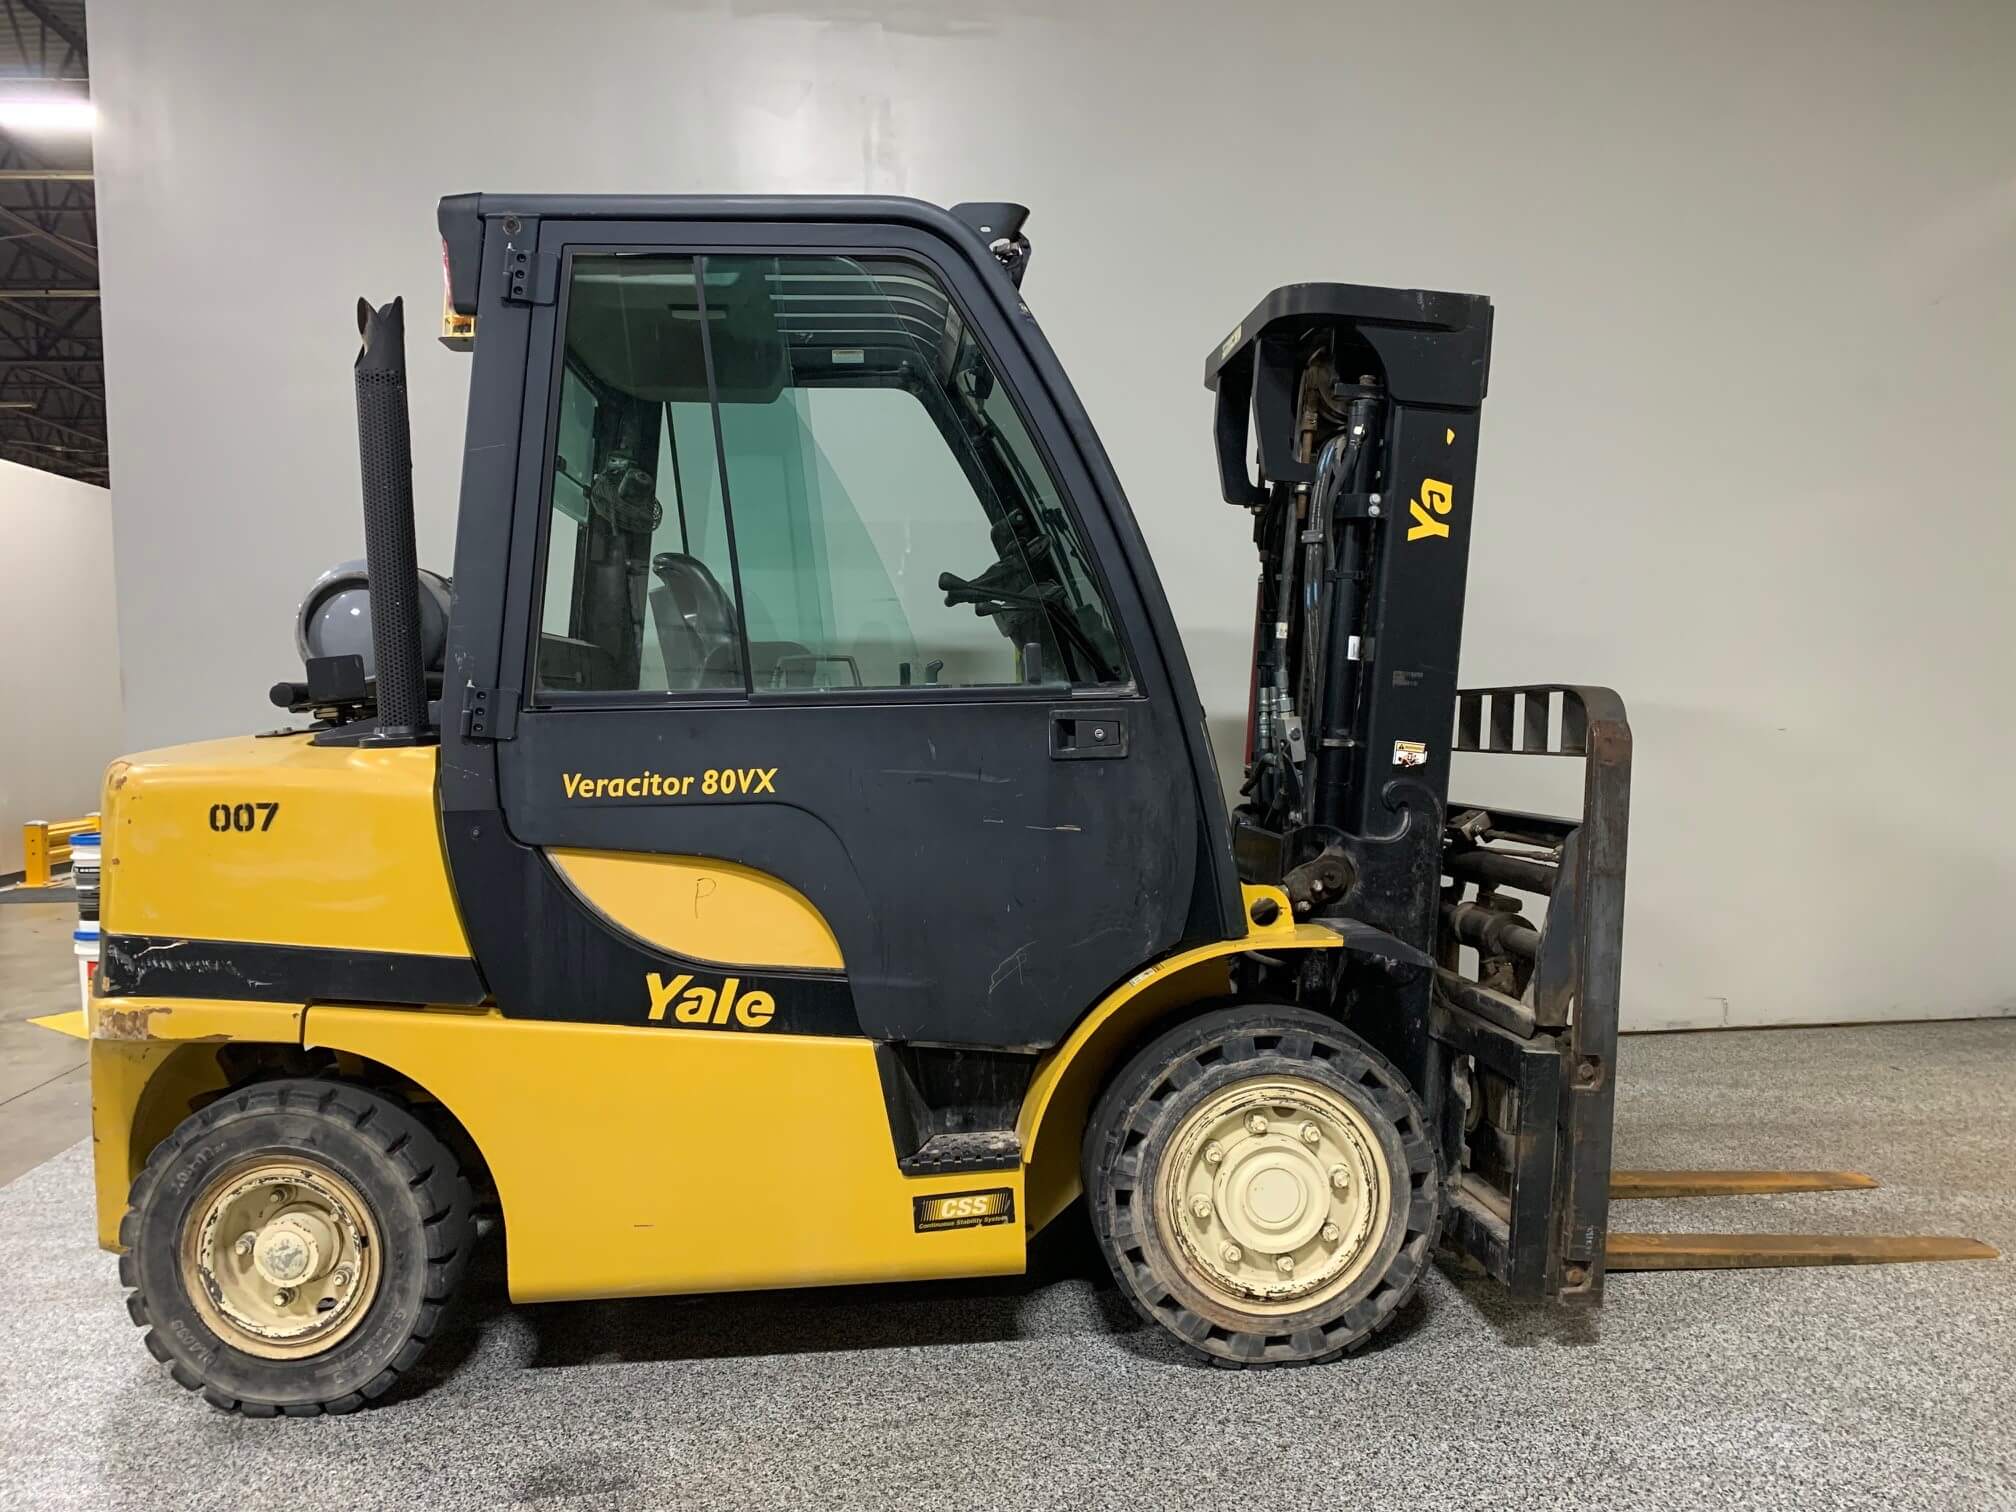 Forklifts Equipment for Sale in Oklahoma